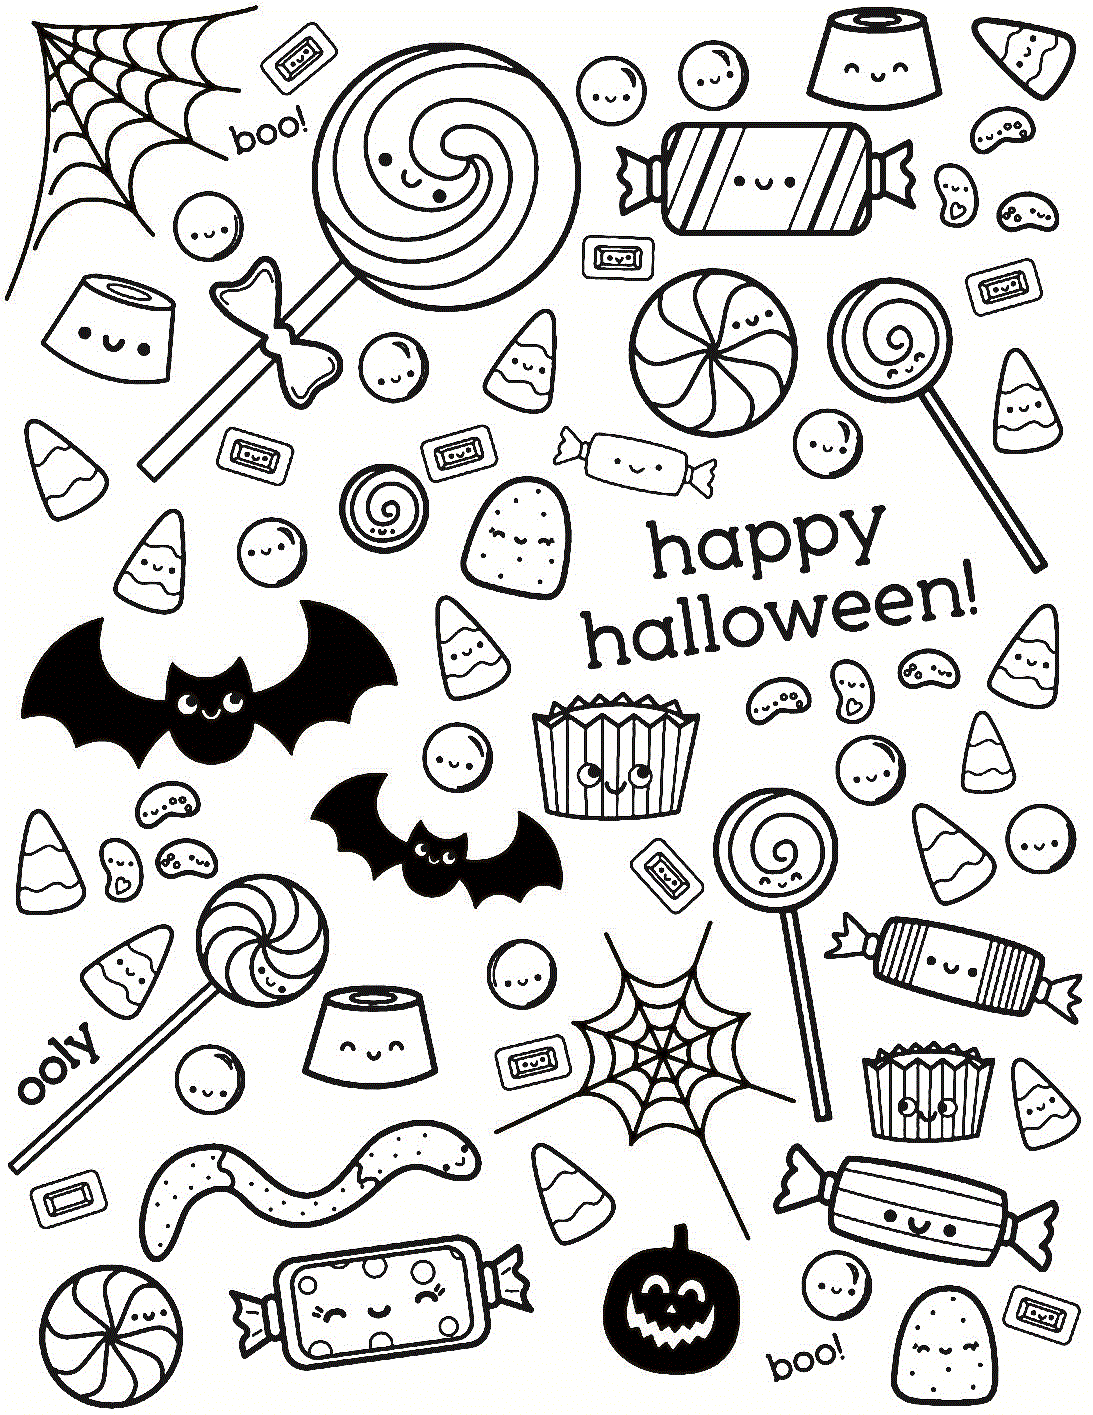 Trick or Treat Candy Coloring Page for Halloween